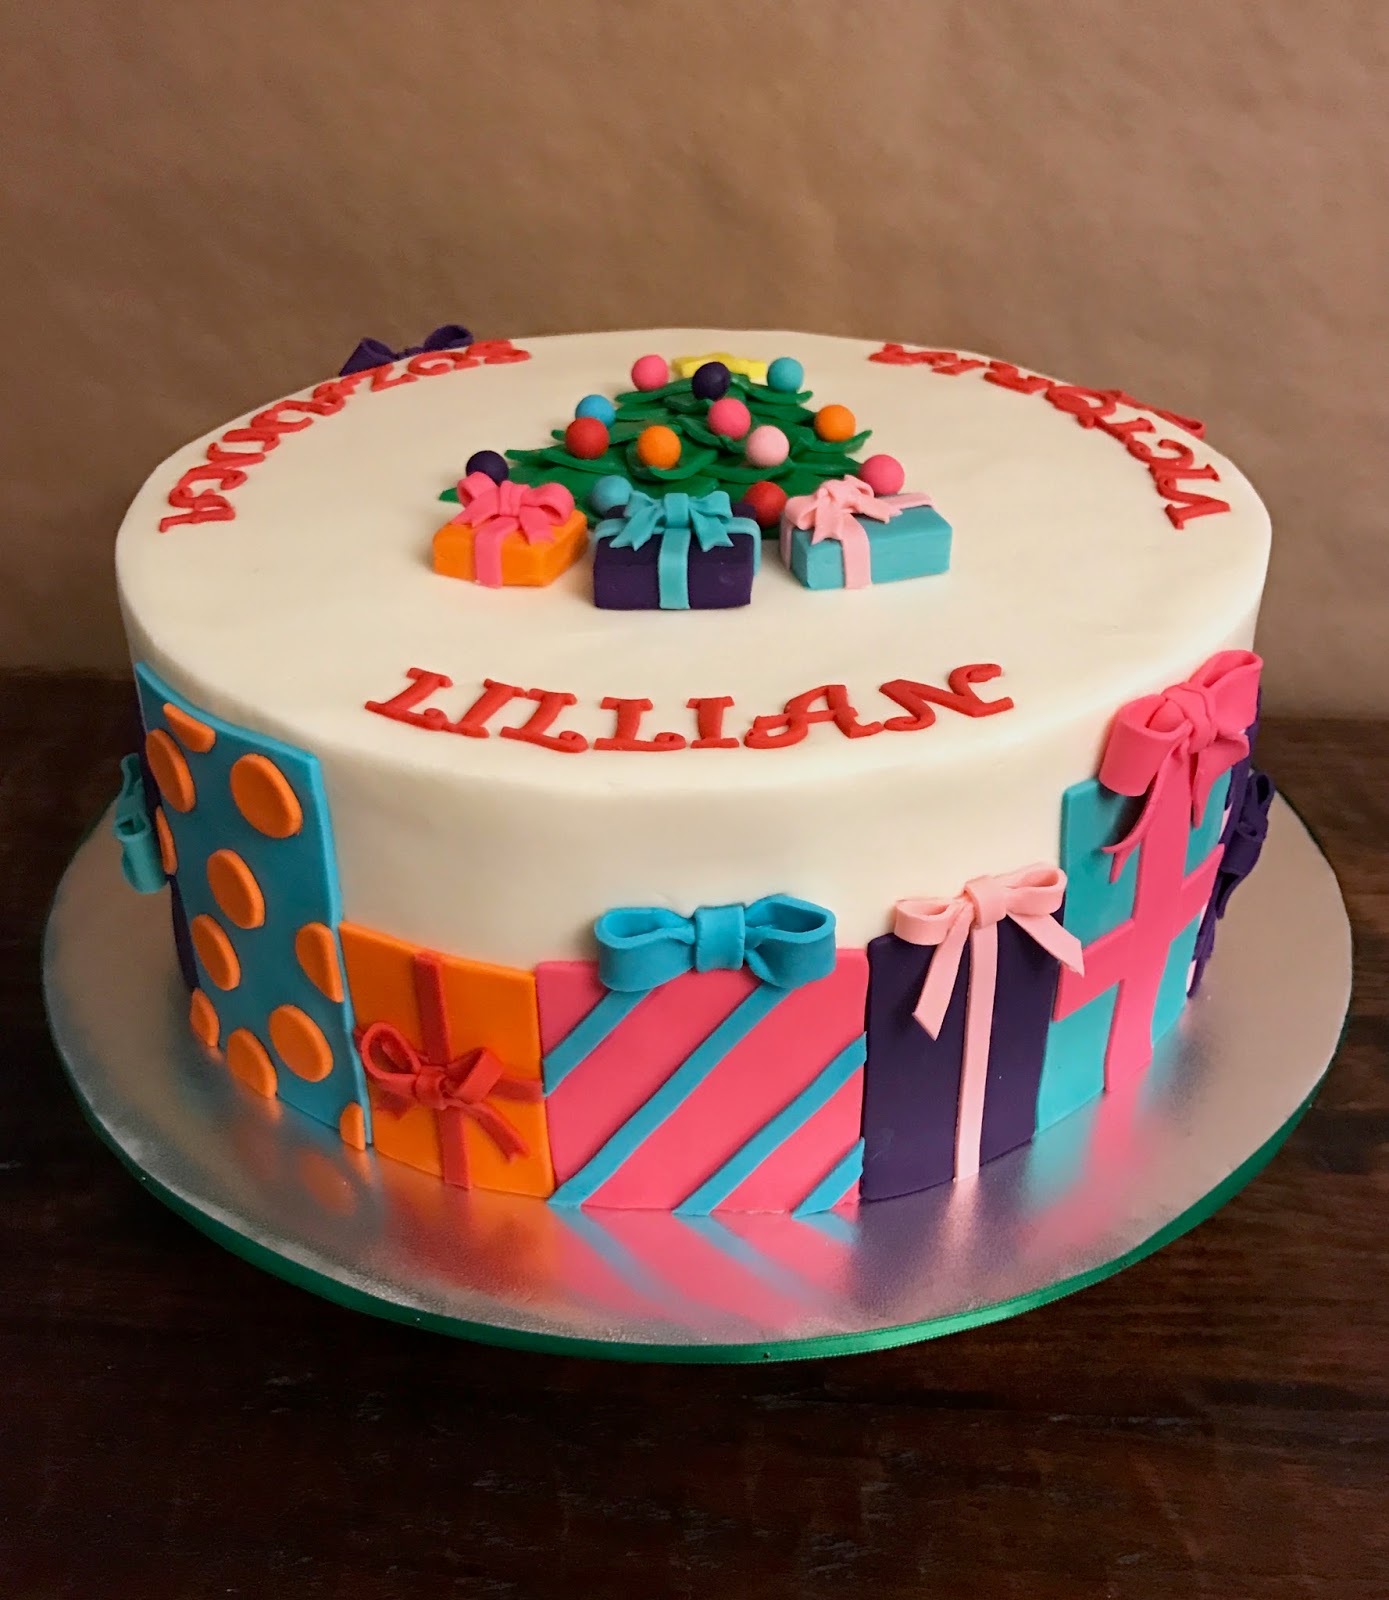 Cakes by Mindy: Christmas Themed Birthday Cake 12"